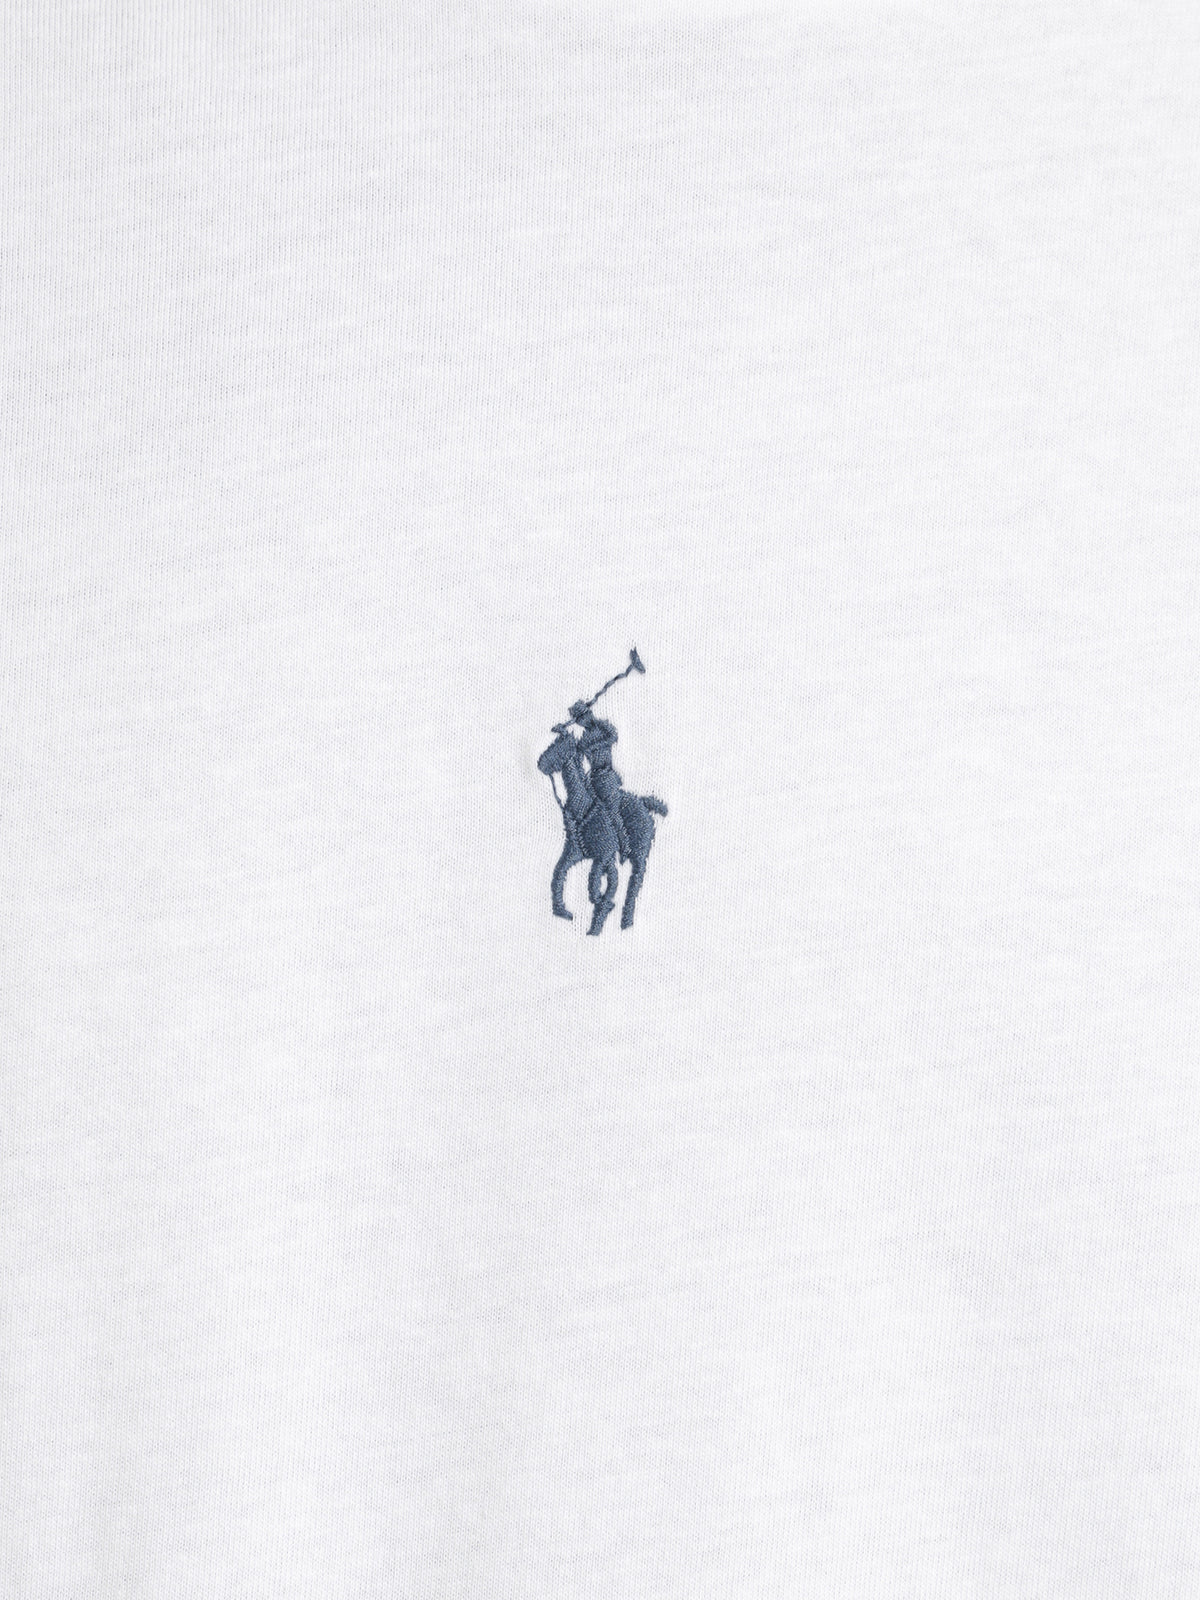 Centre Pony T-Shirt in White